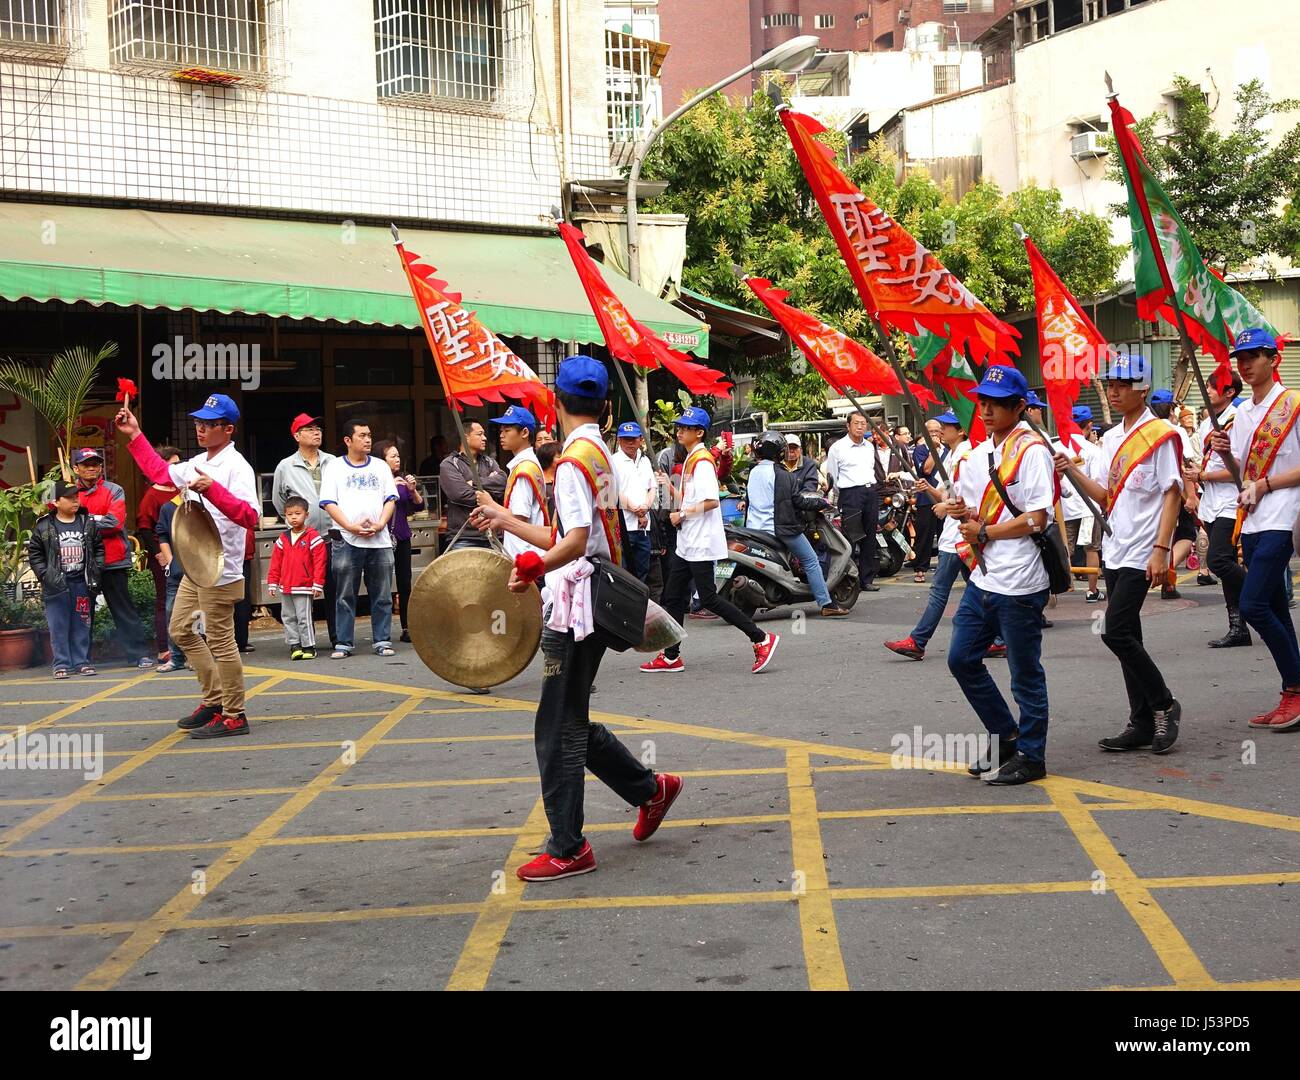 KAOHSIUNG, TAIWAN -- MARCH 16, 2014: Religious devotees carry flags and beat gongs in a procession that is part of a local religious ceremony. Stock Photo